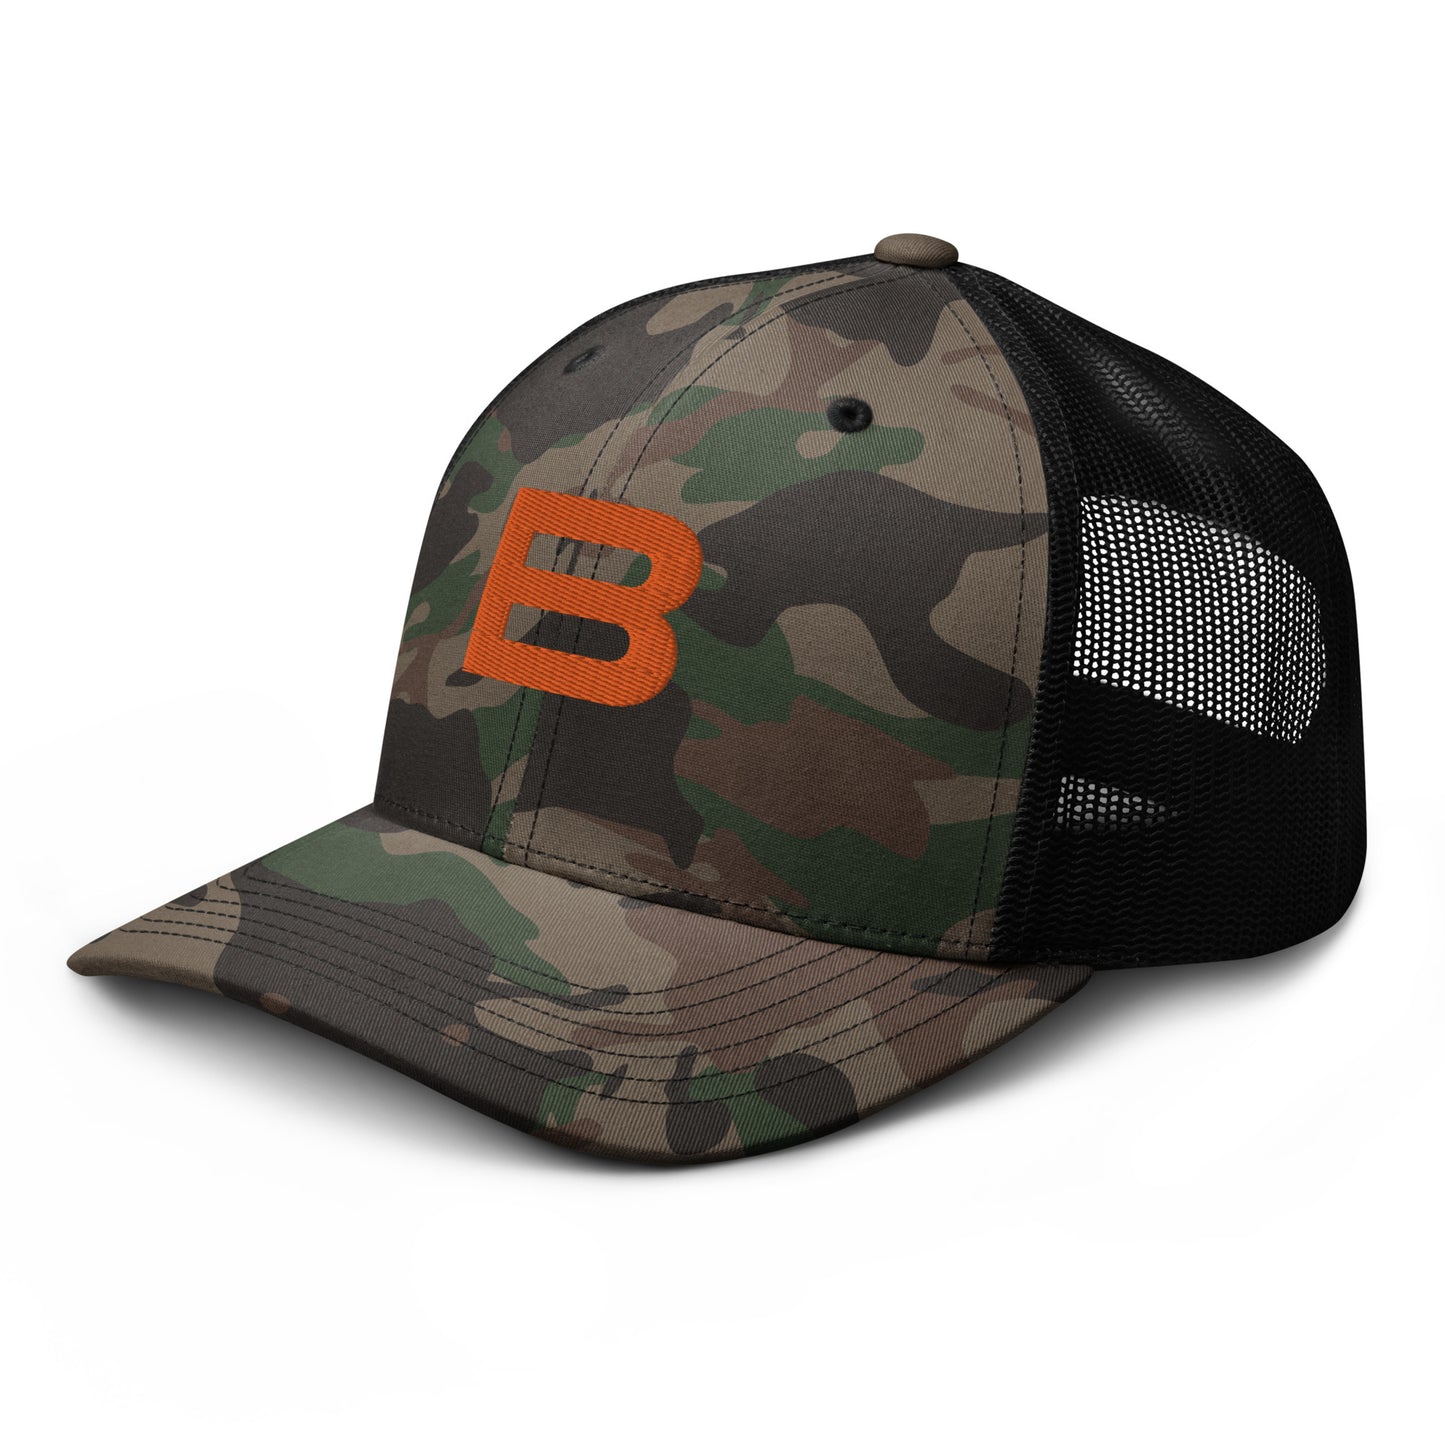 Limited Edition Bomber Camouflage trucker hat